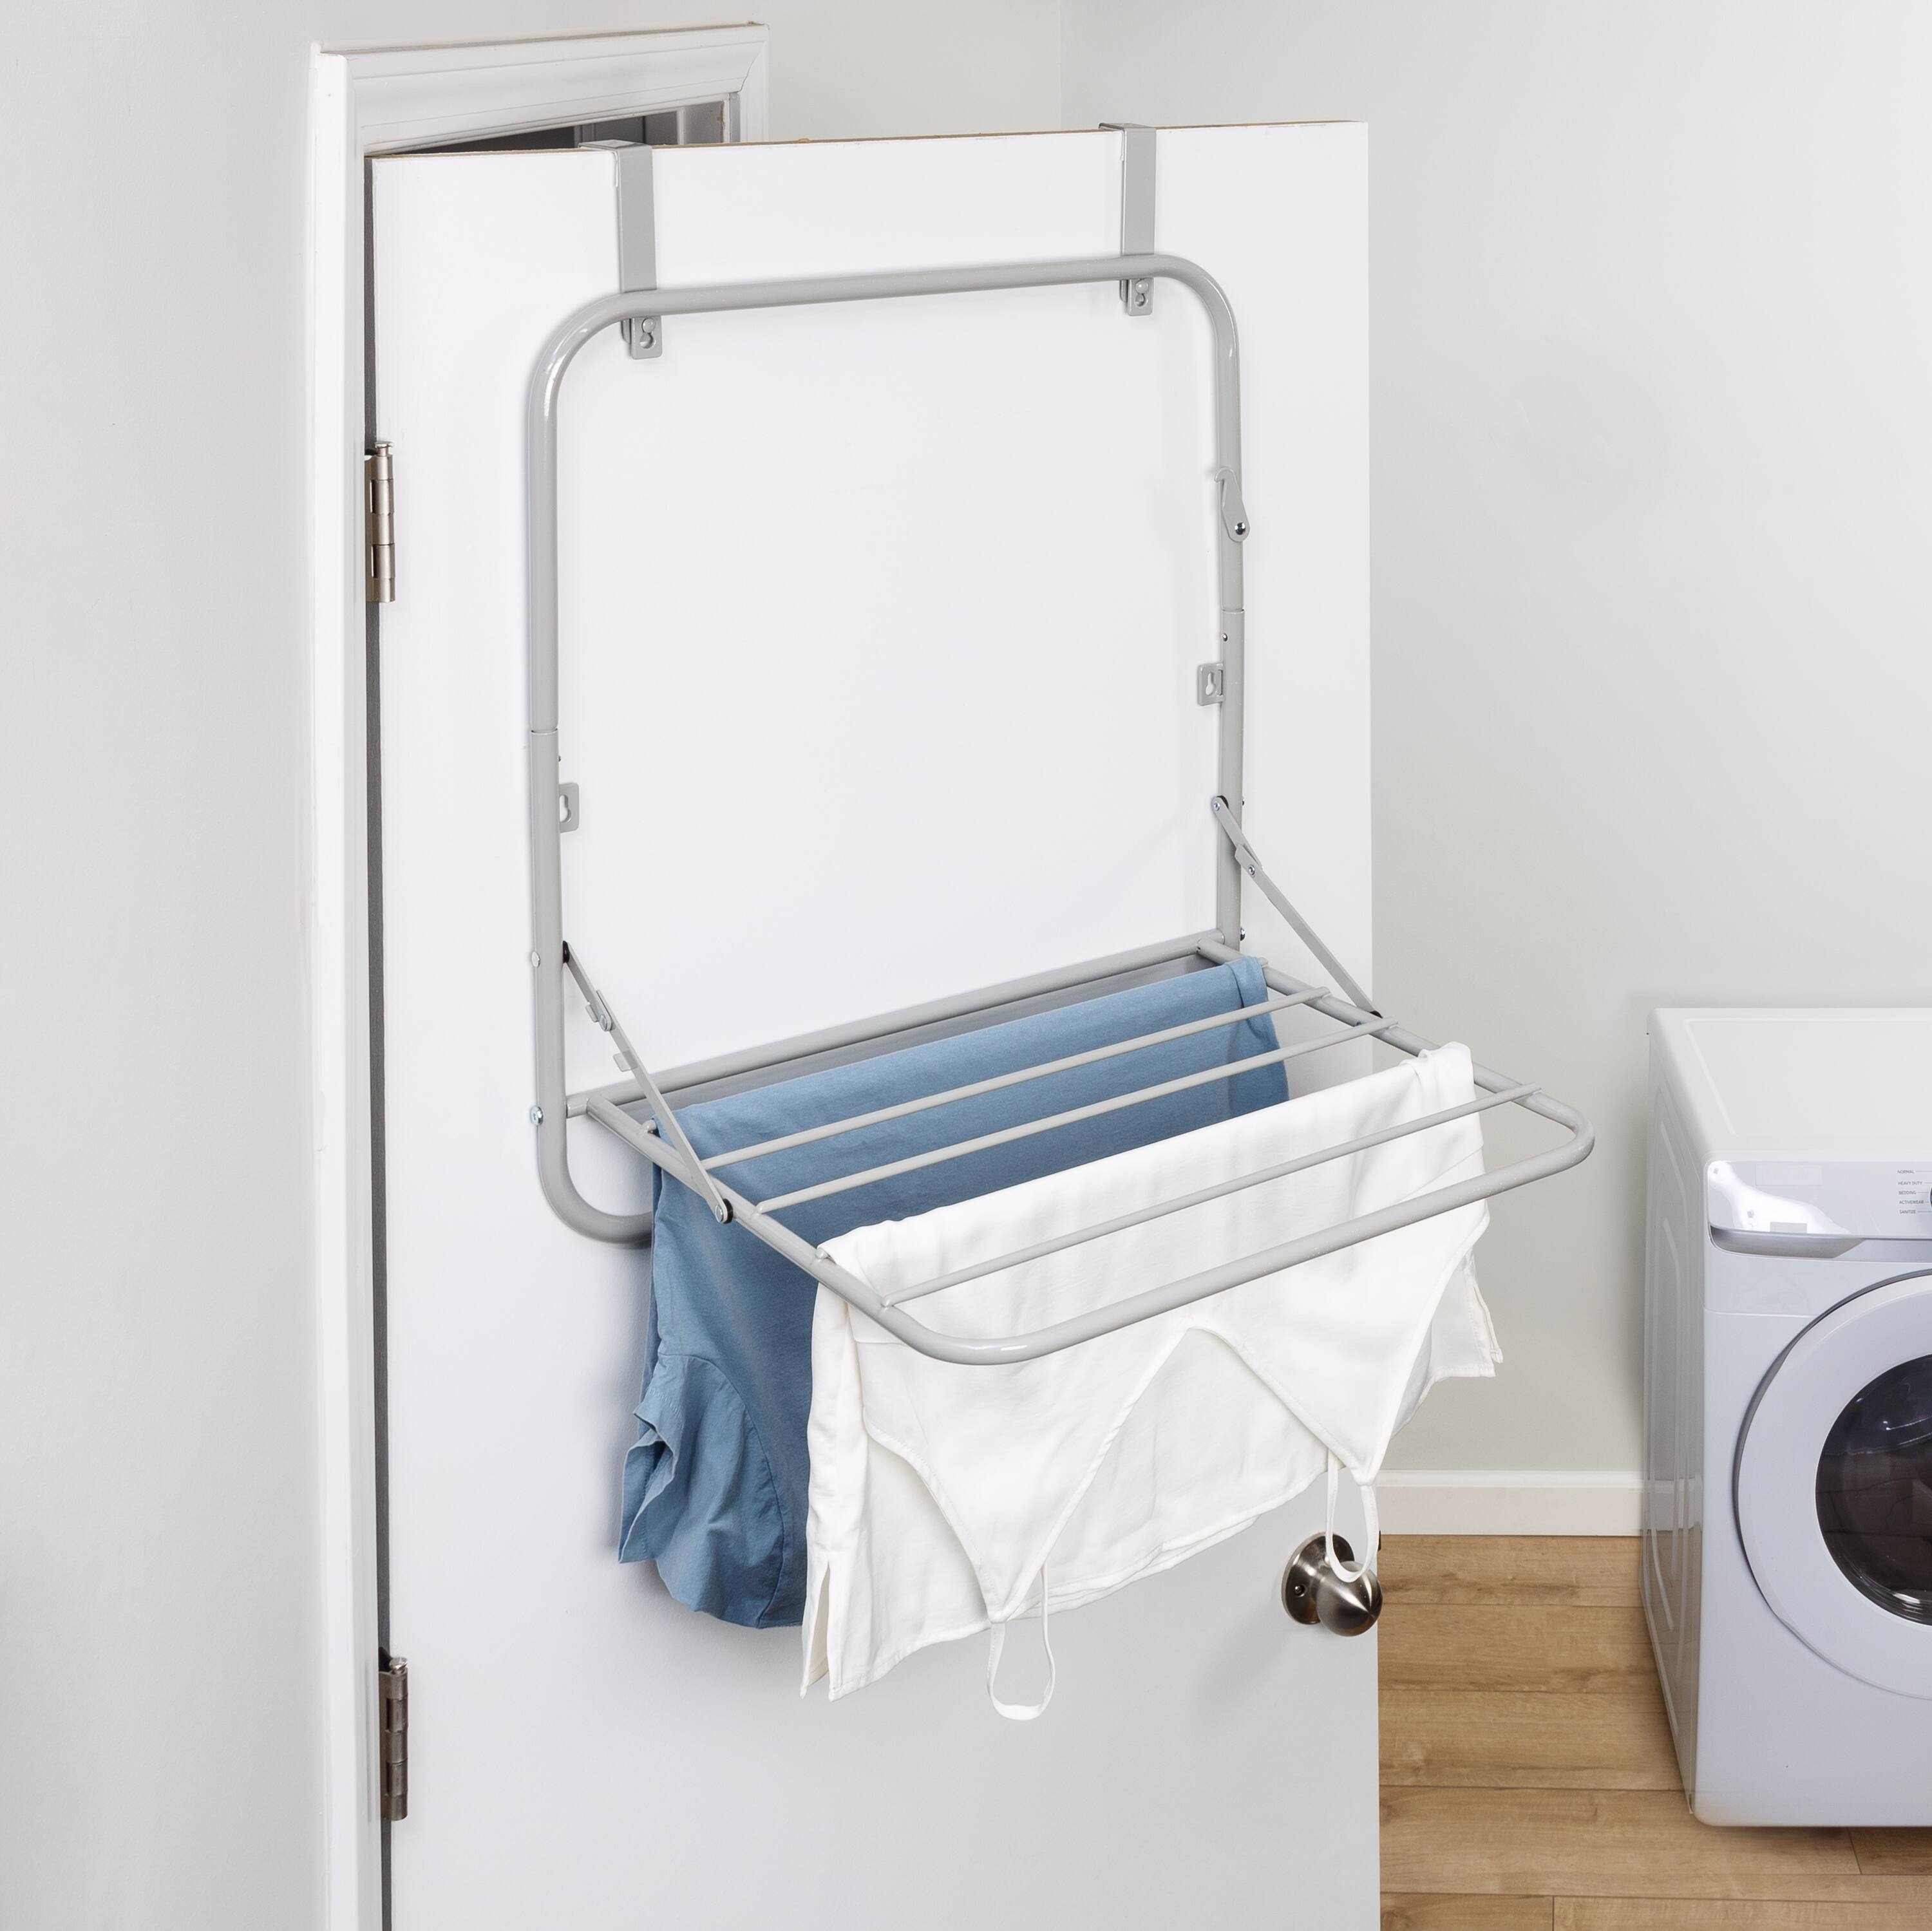 Honey Can Do Gray Collapsible Wall-Mounted Clothes Drying Rack